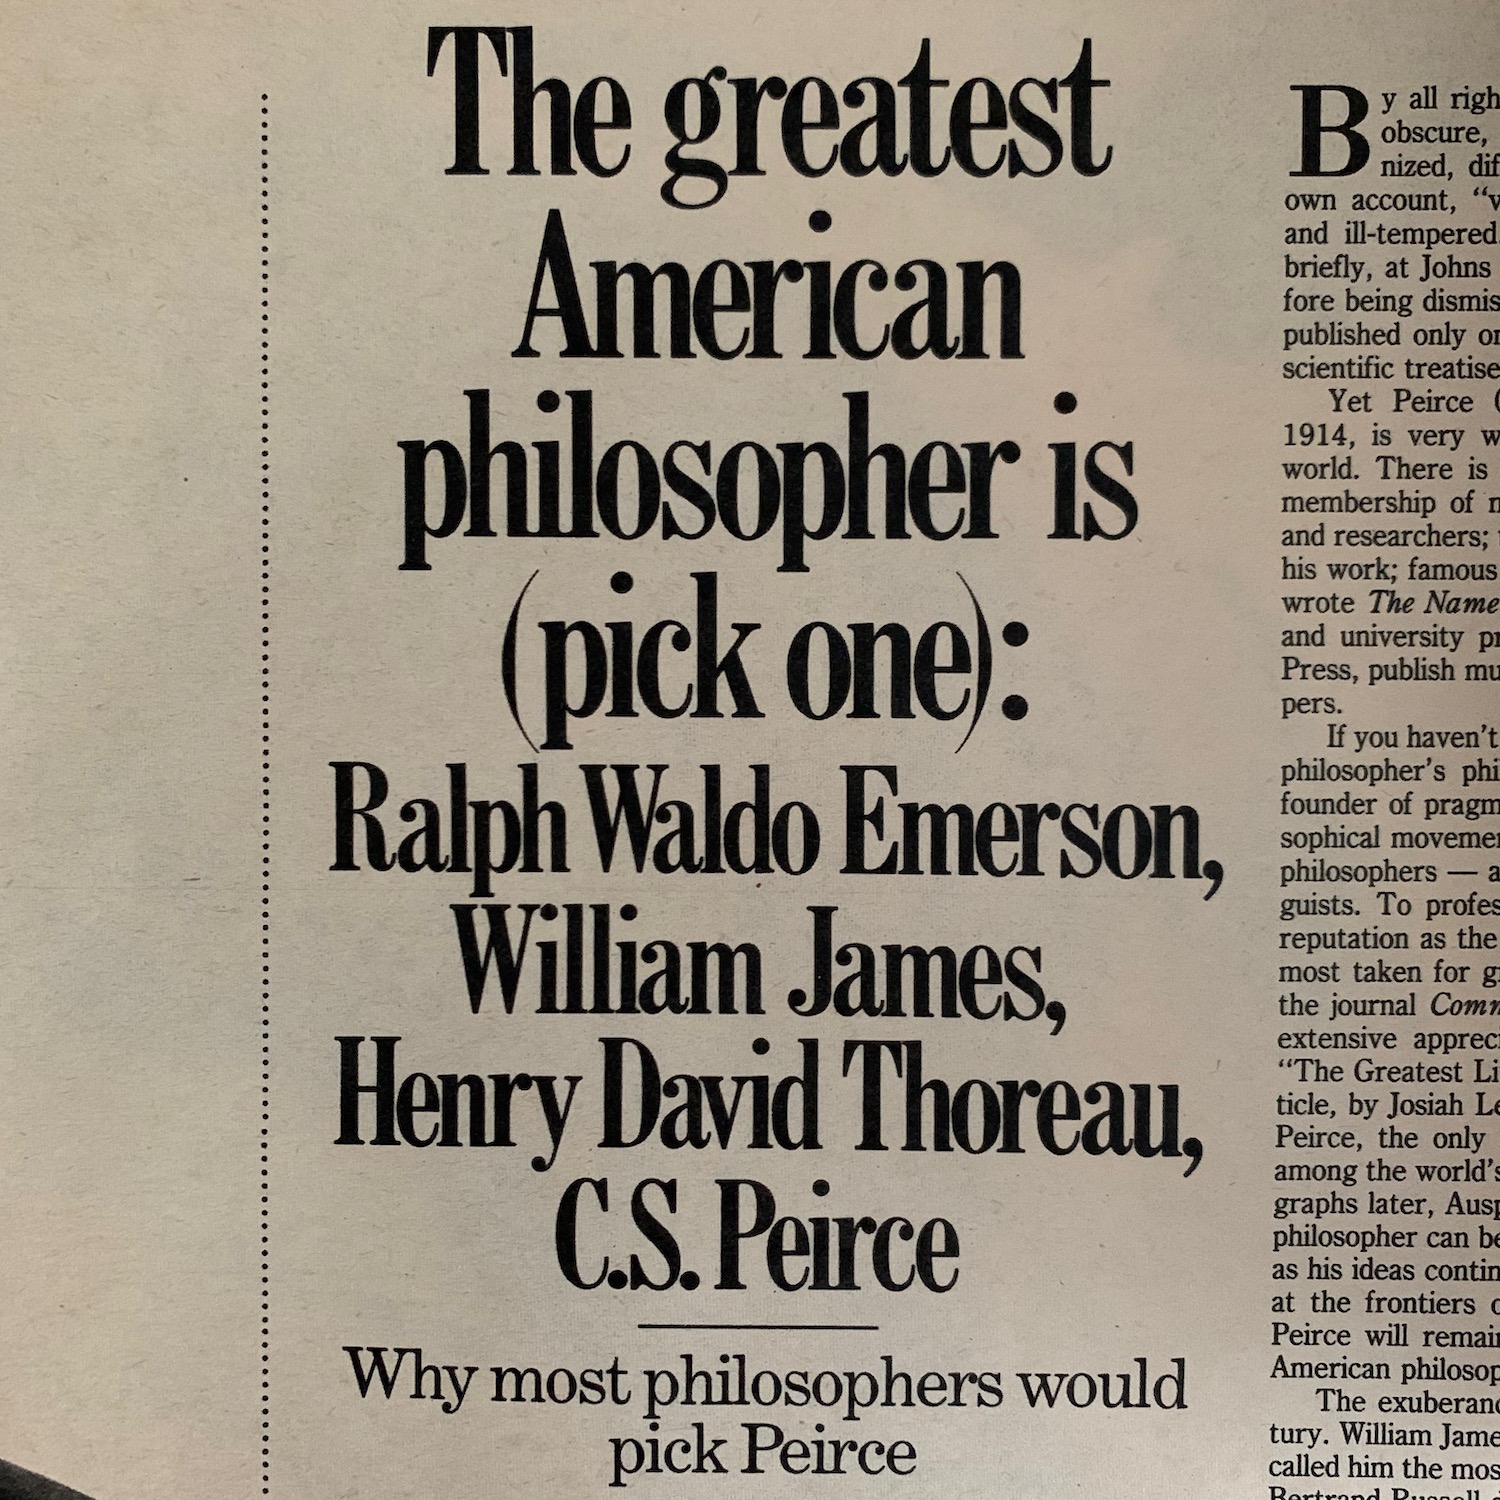 article subtitle on why most philosophers would pick Peirce as the greatest American philosopher